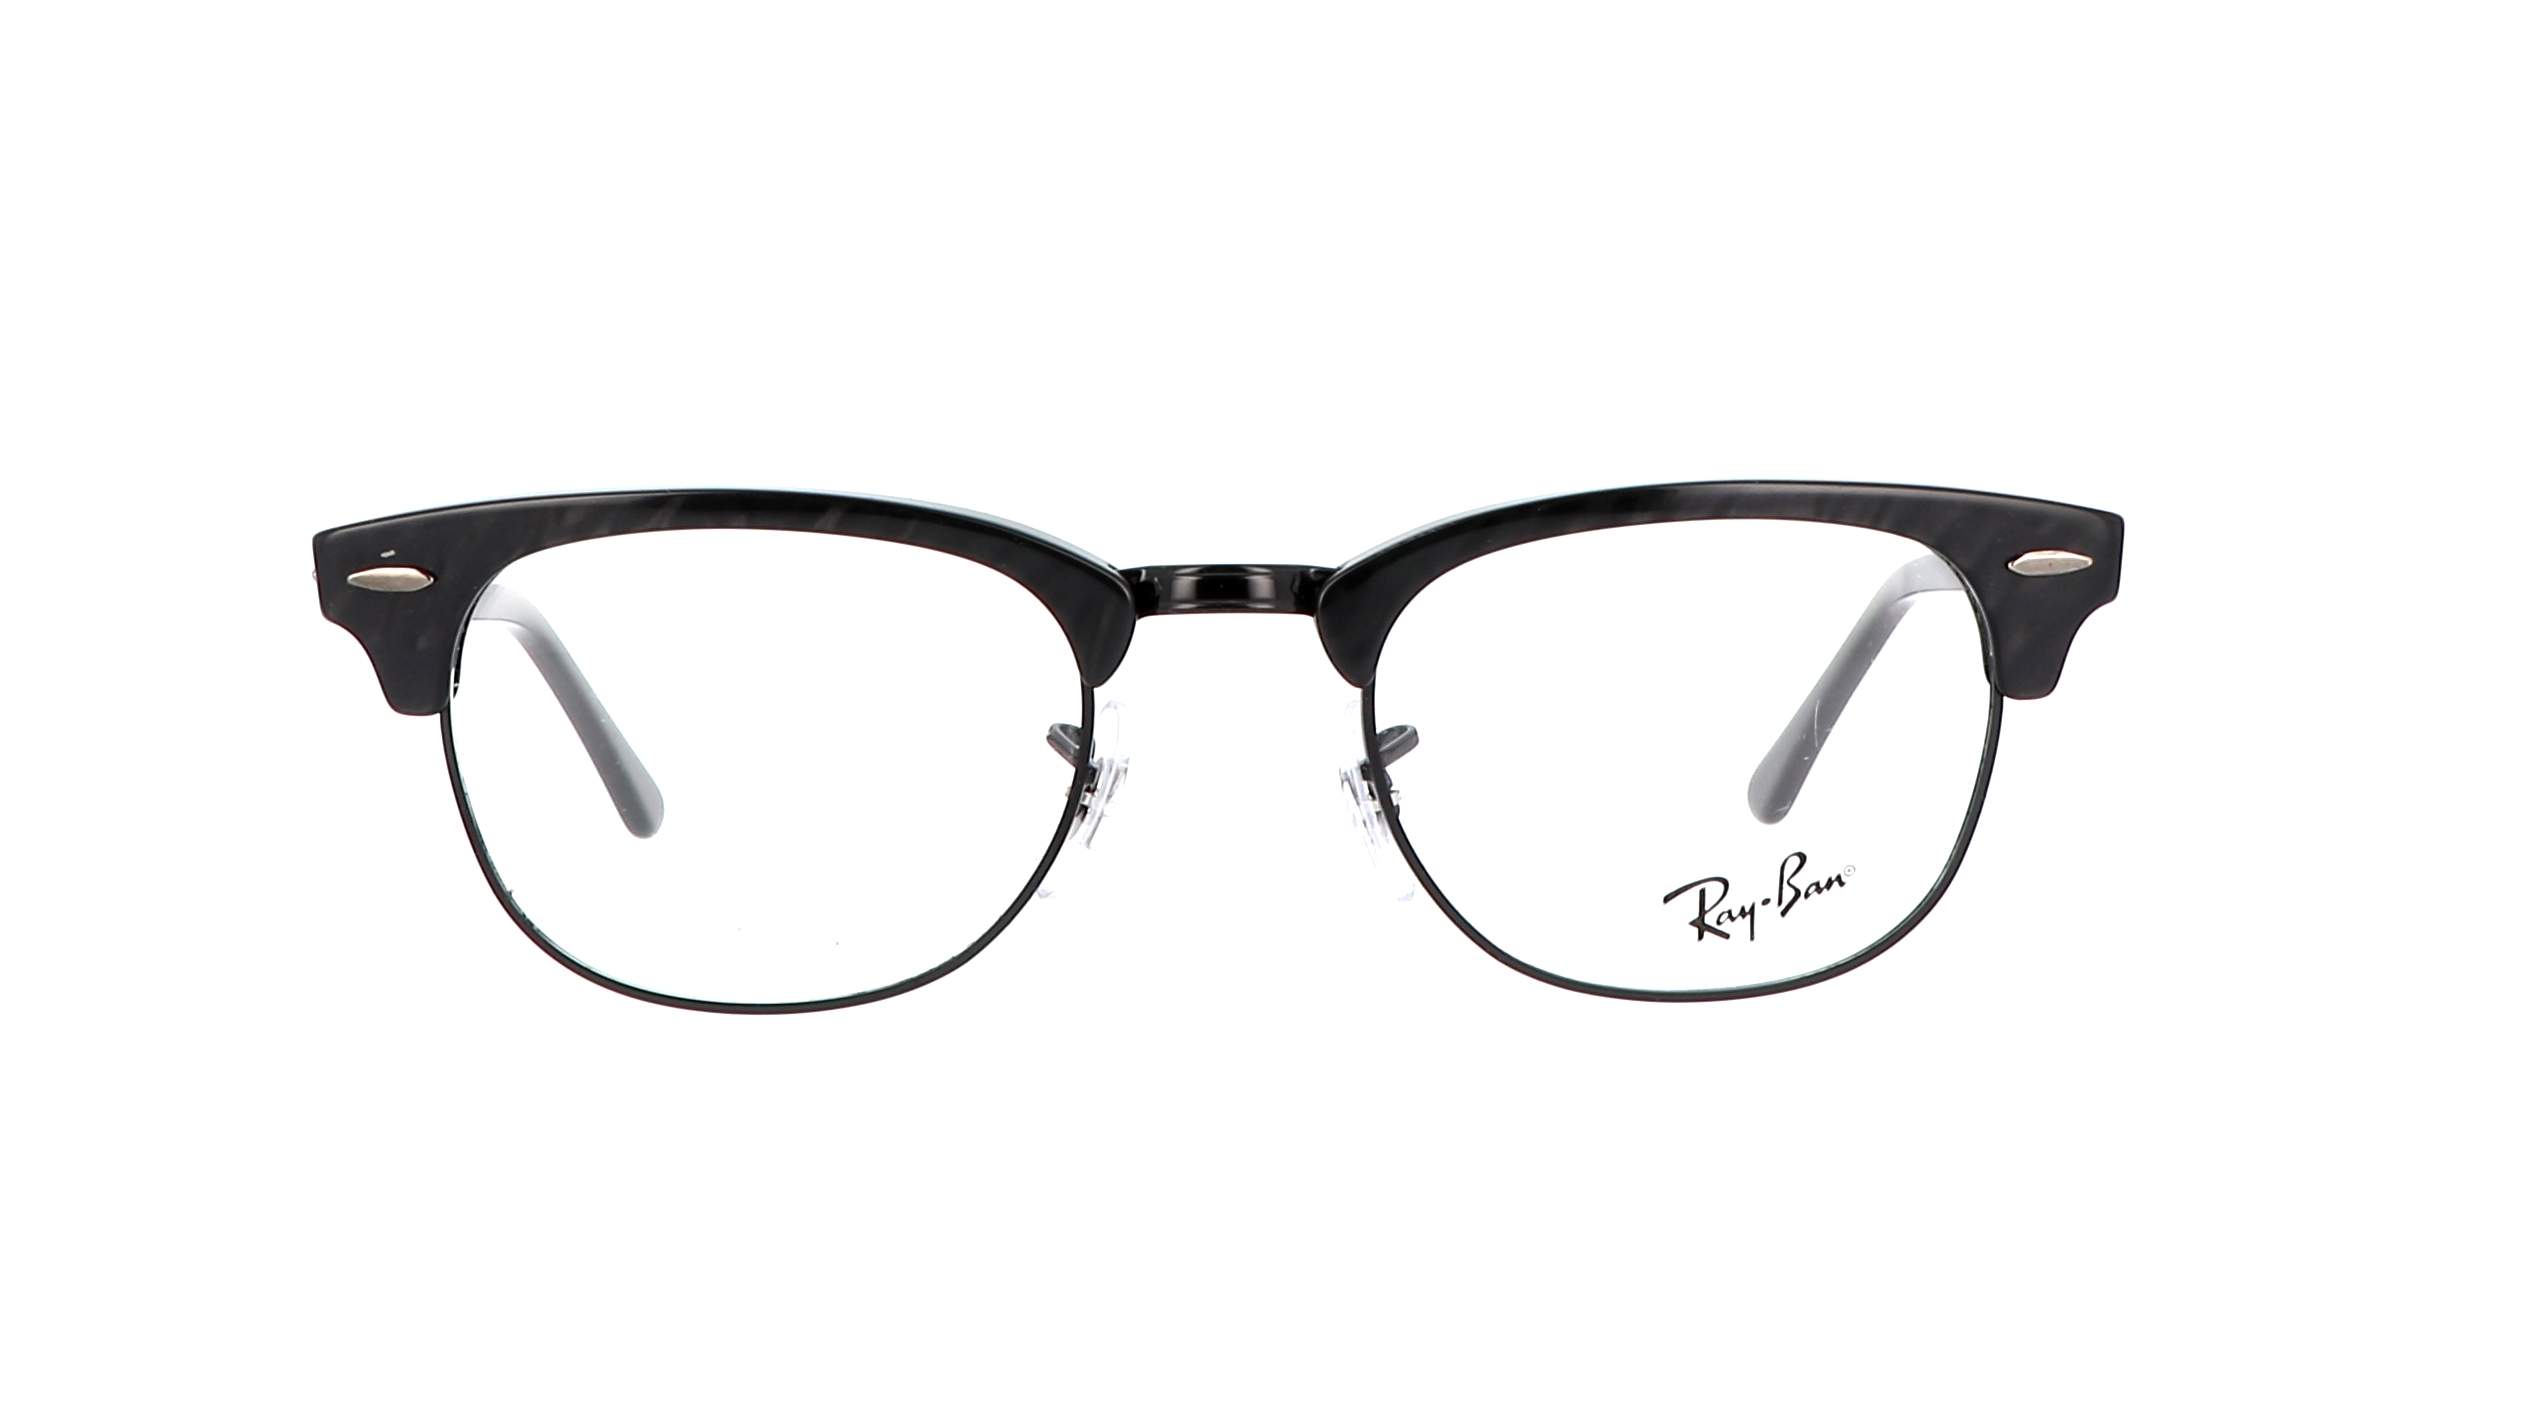 Eyeglasses Ray-Ban Clubmaster Black RX5154 RB5154 8049 49-21 Small in ...